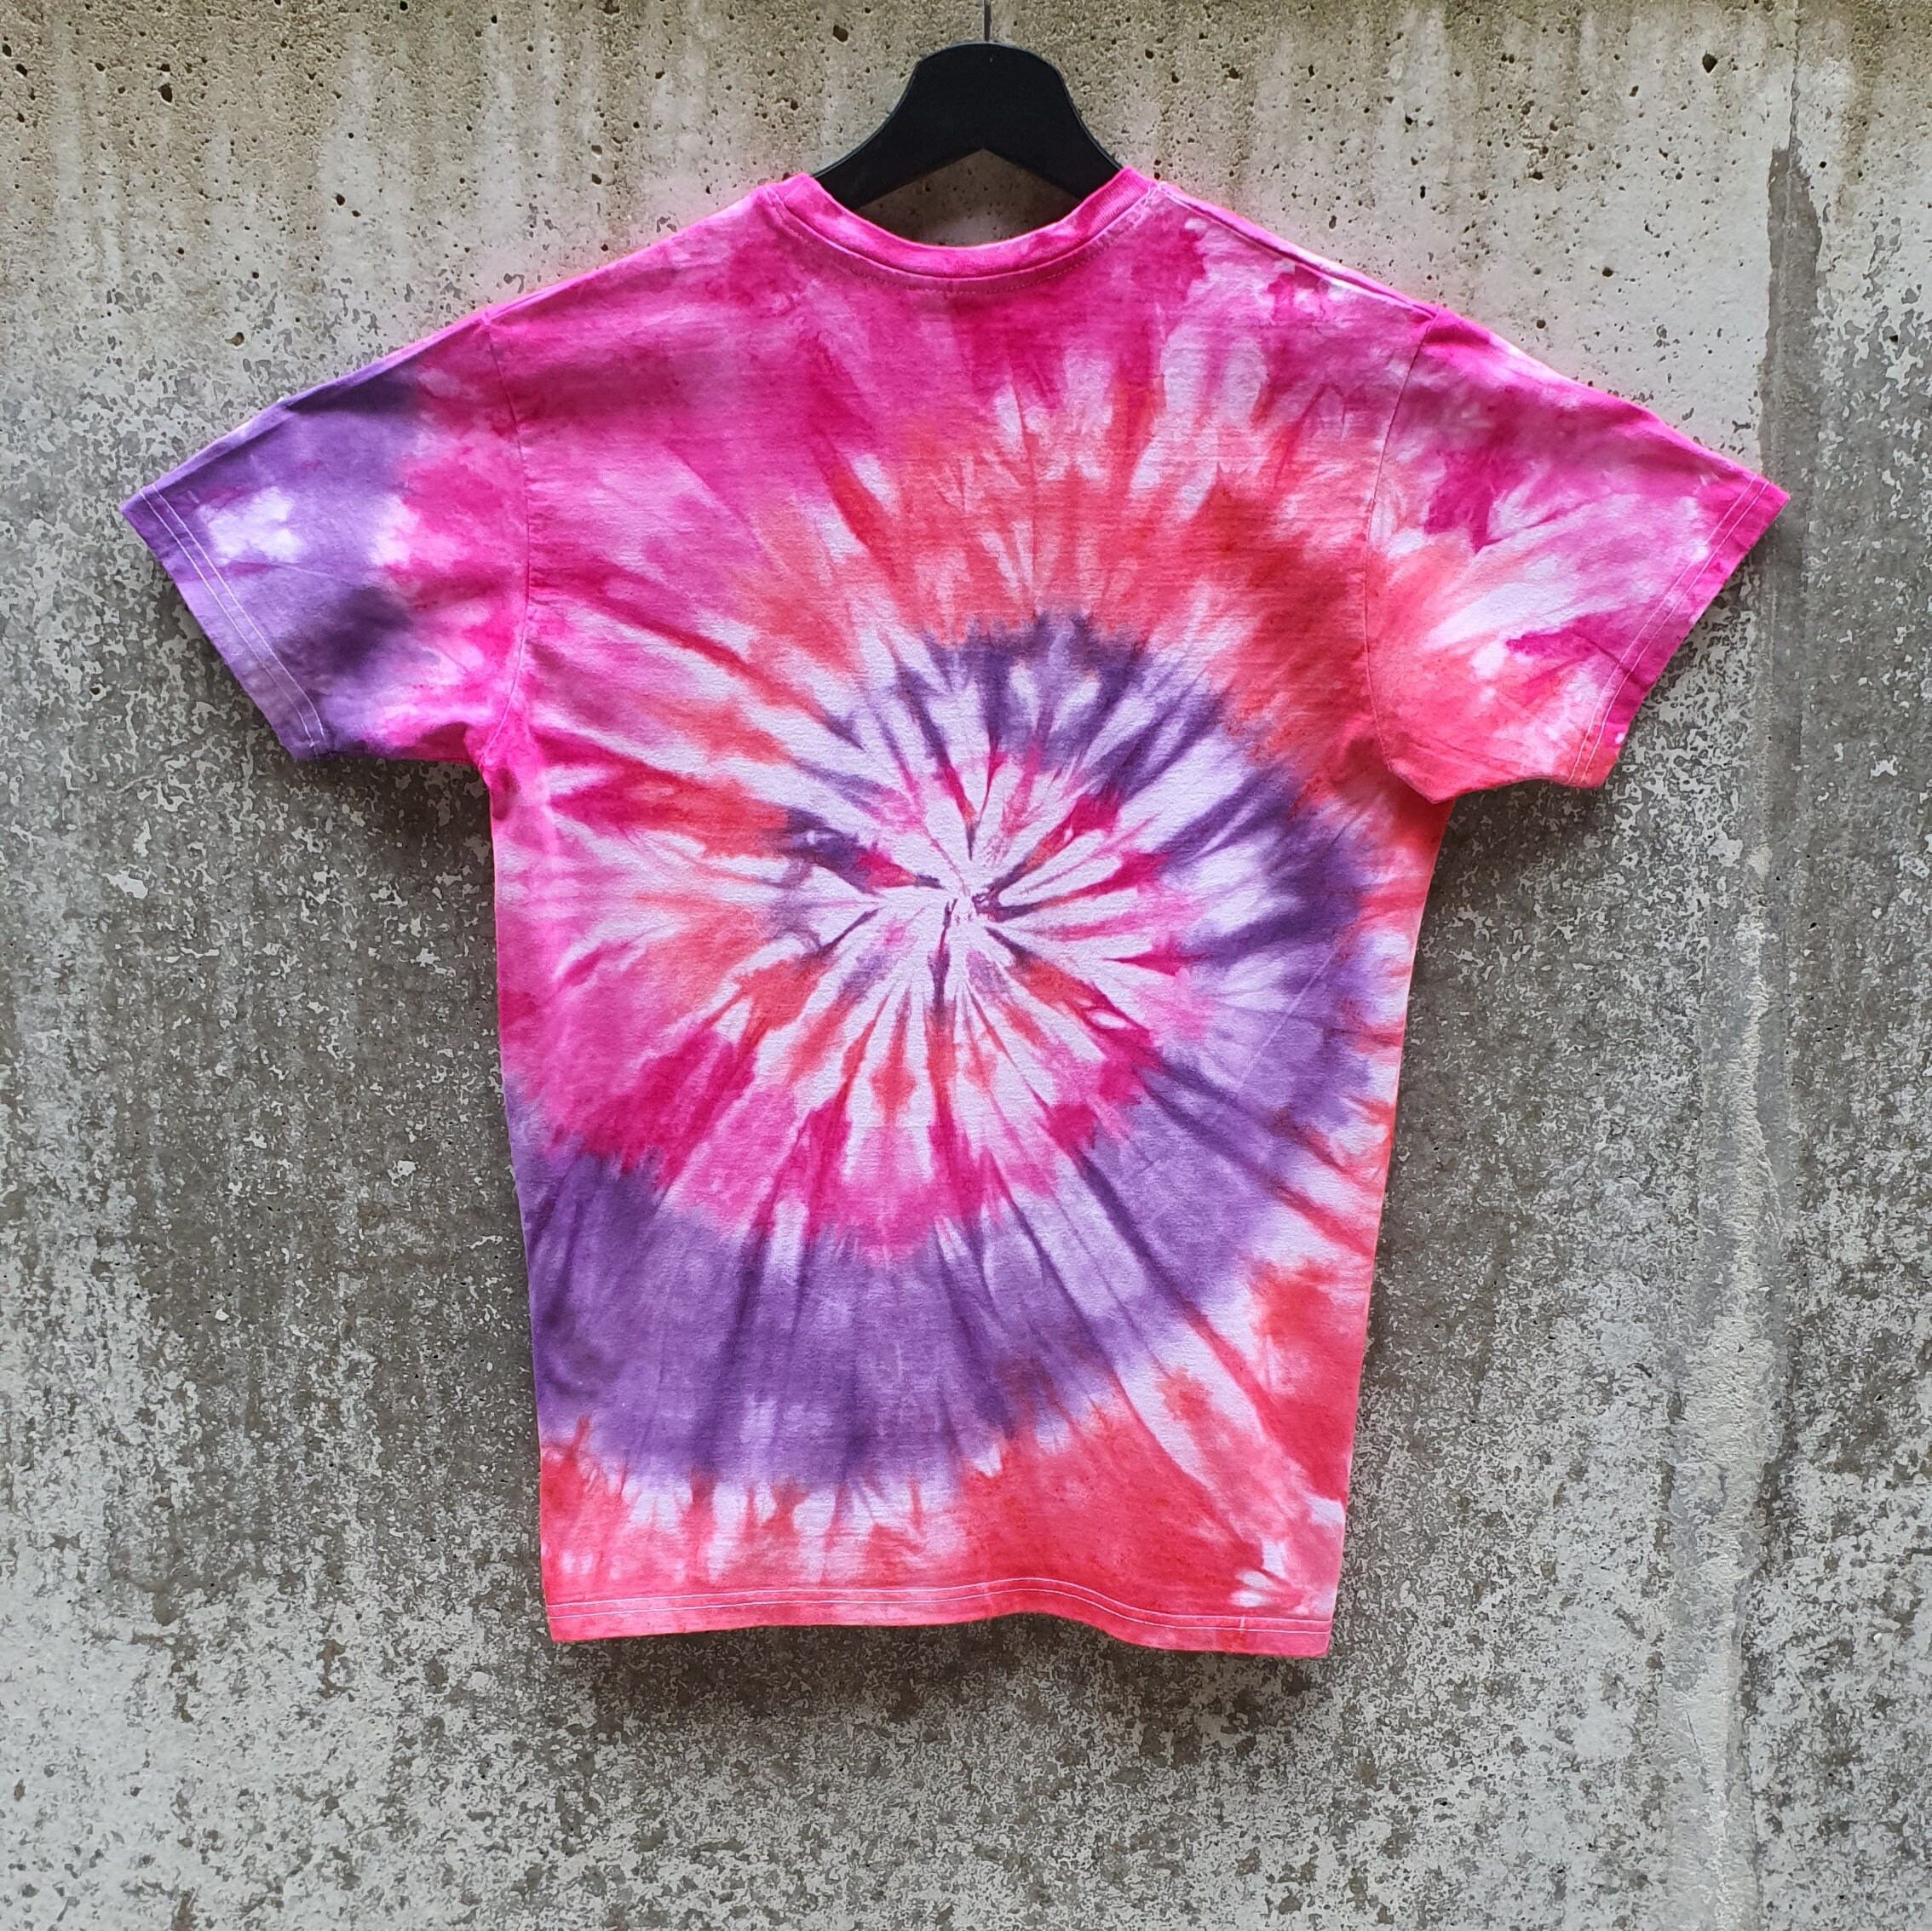 Discover Pink - purple - red spiral tie dye t-shirt with skull patch unisex size S